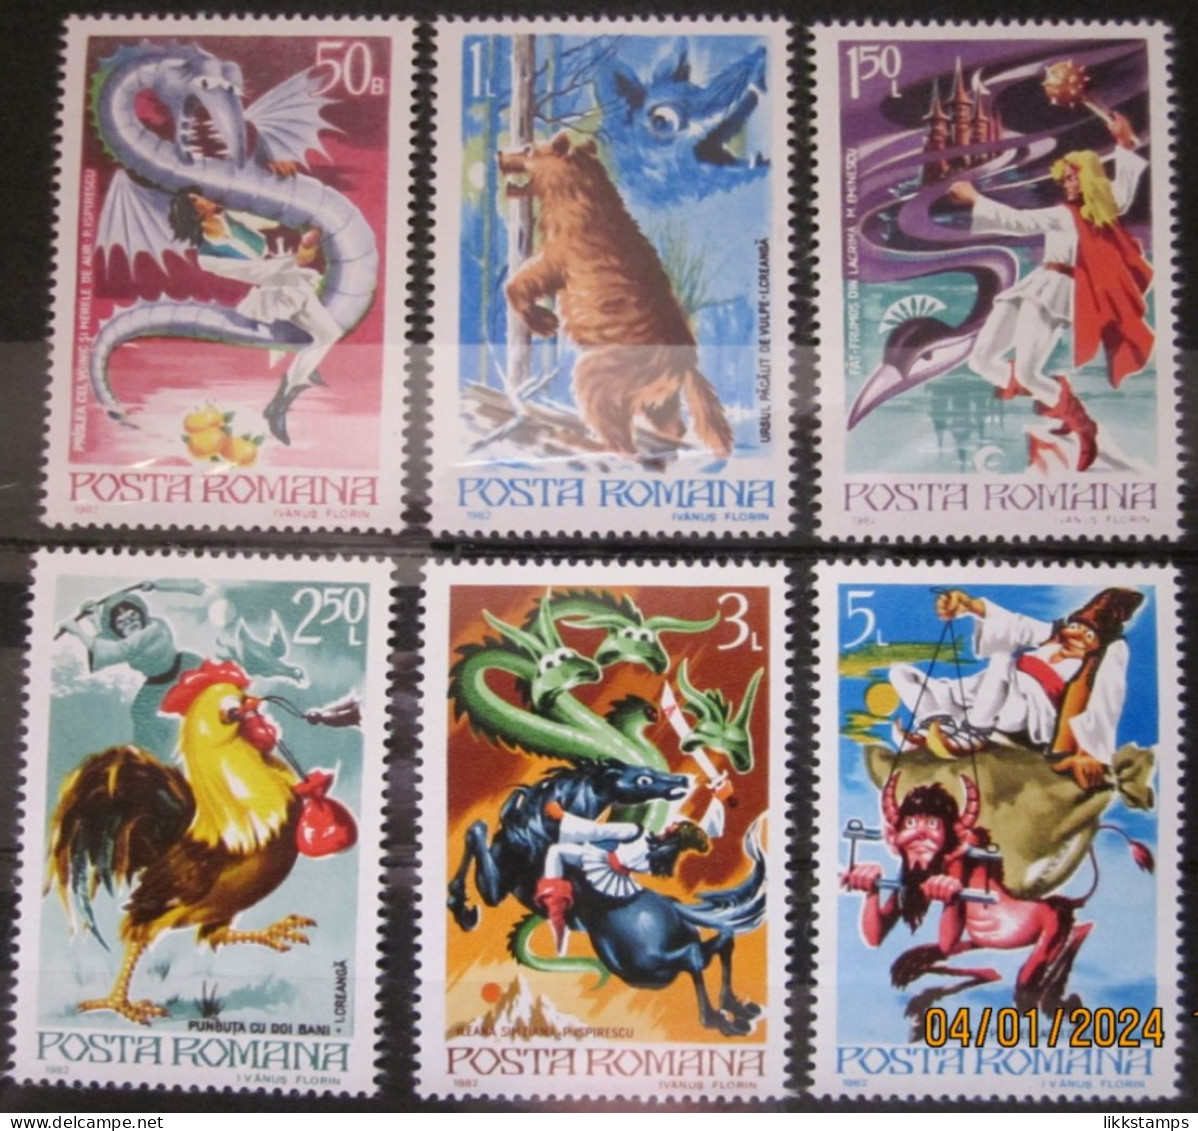 ROMANIA ~ 1982 ~ S.G. NUMBERS 4737 - 4742. ~ FAIRY TALES. ~ MNH #03548 - Ungebraucht